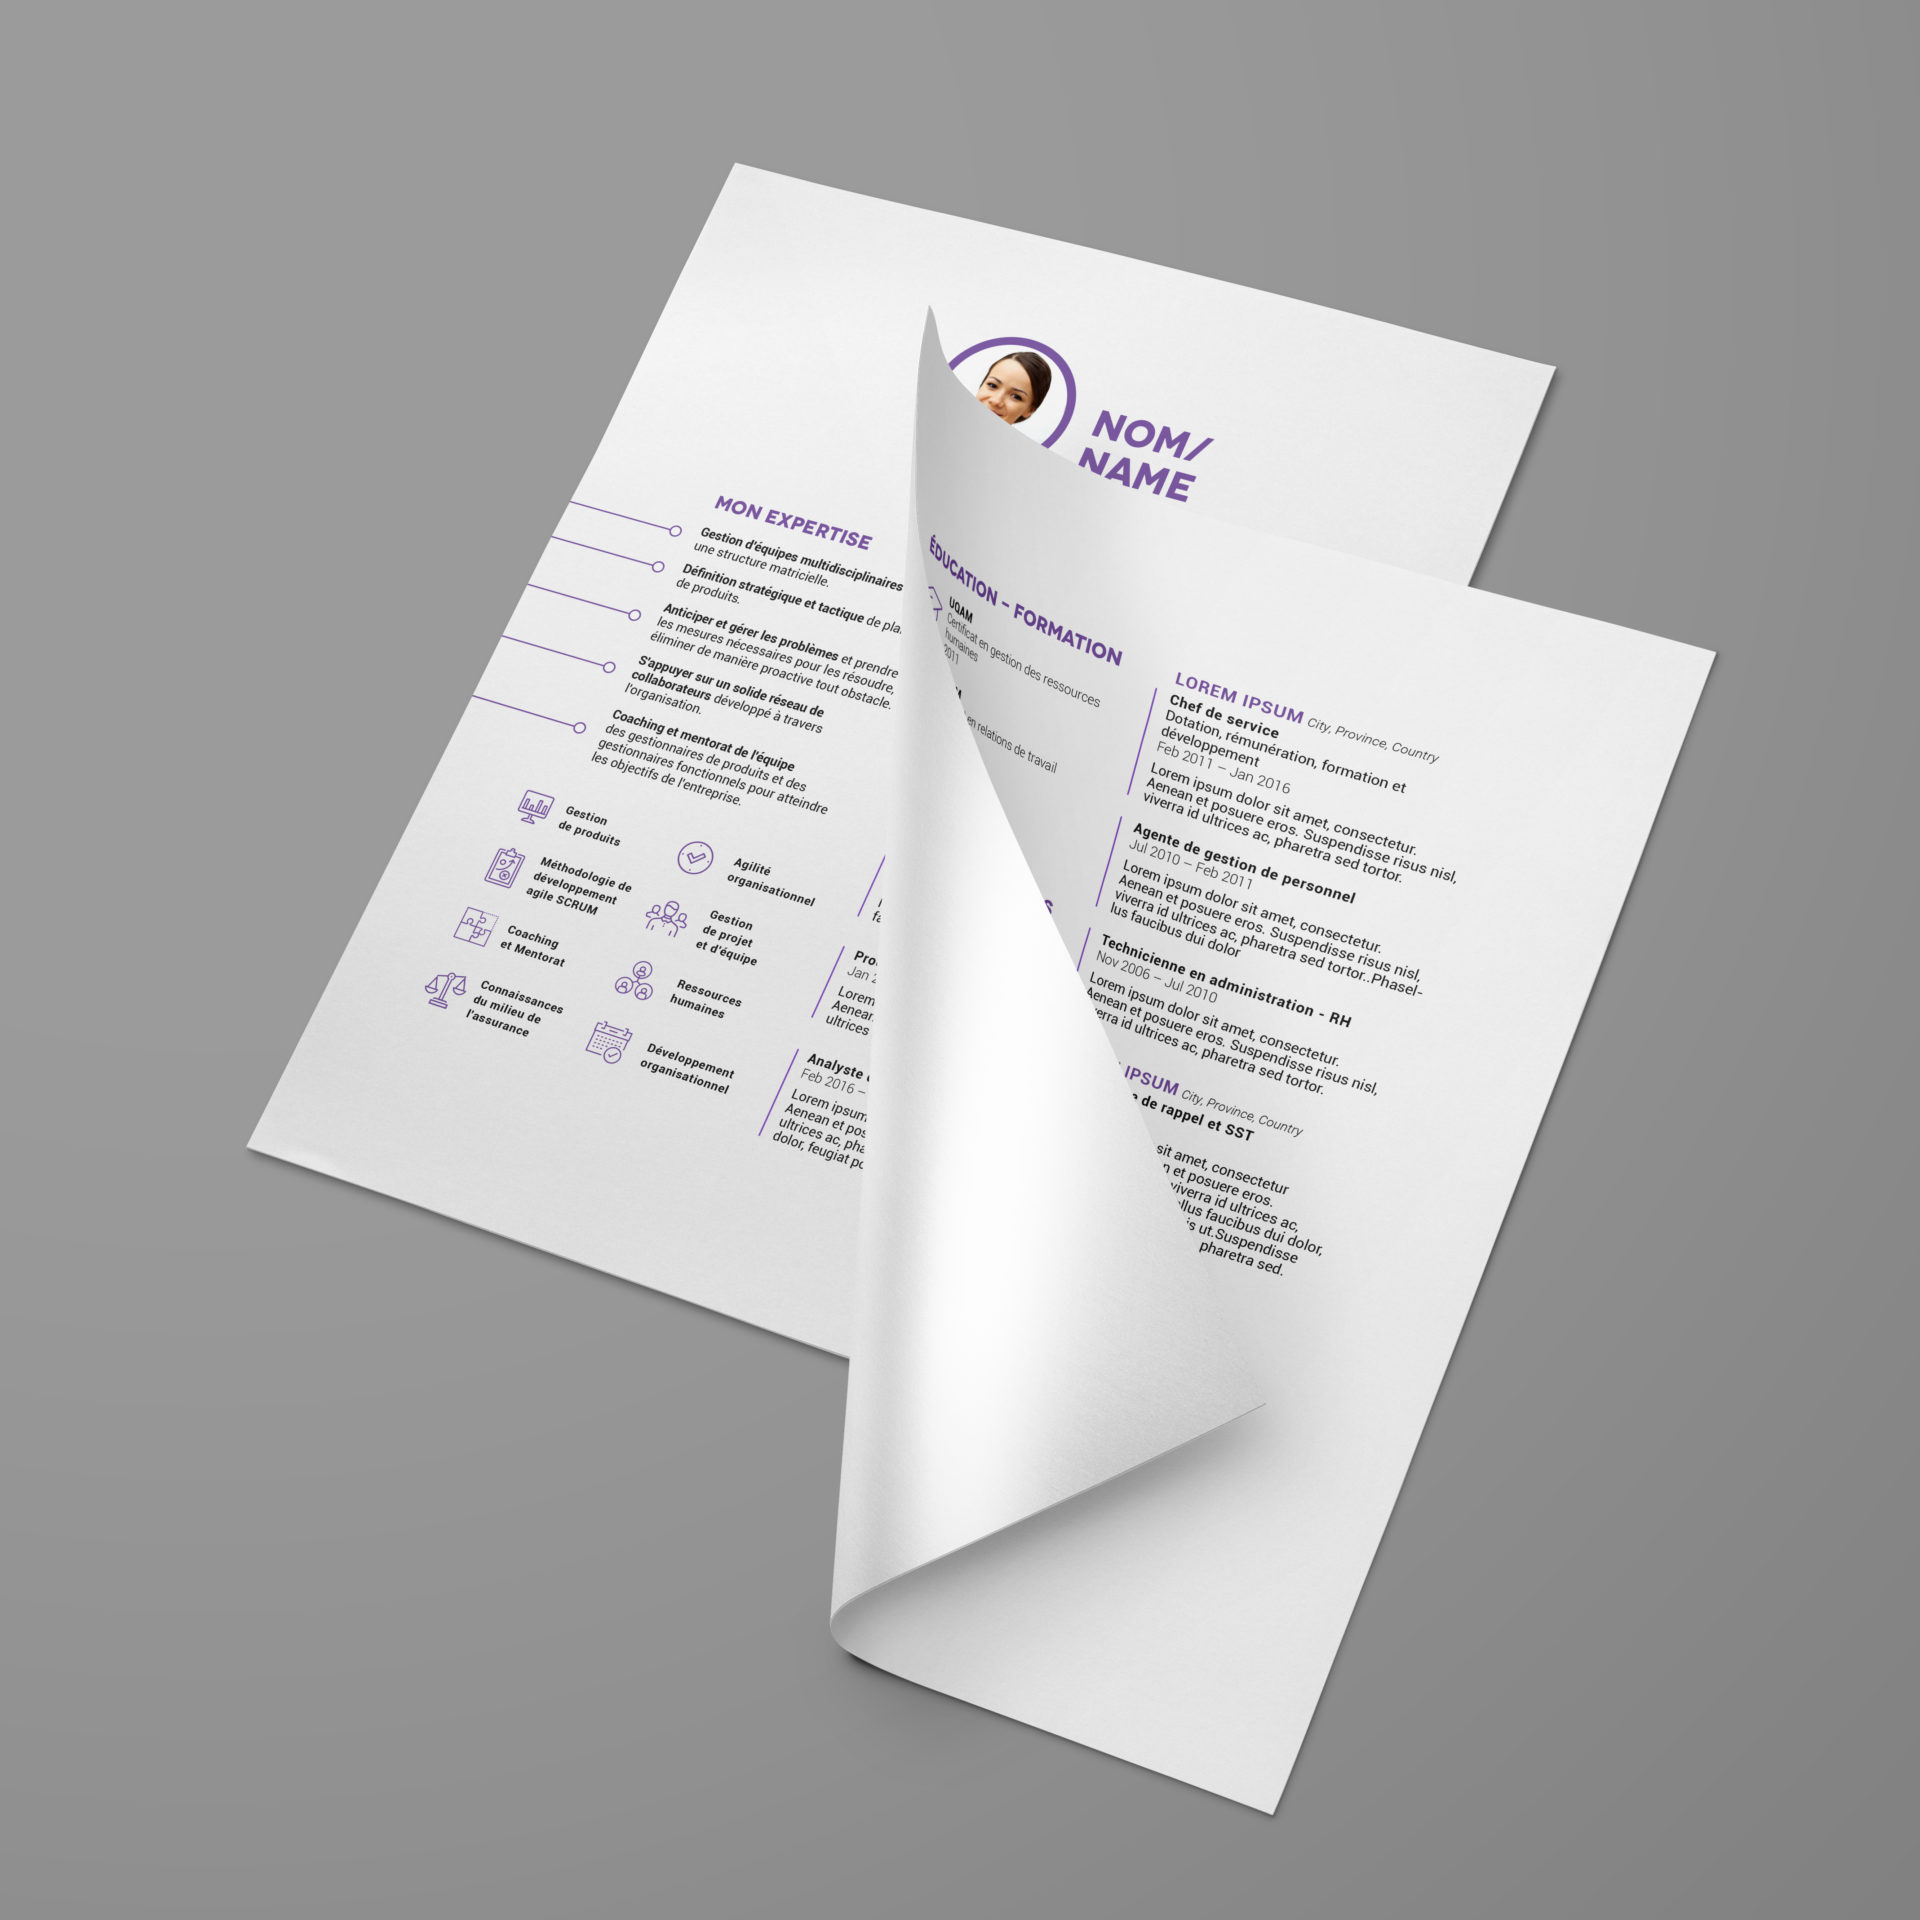 front and back of CV on white background with purple and black text.